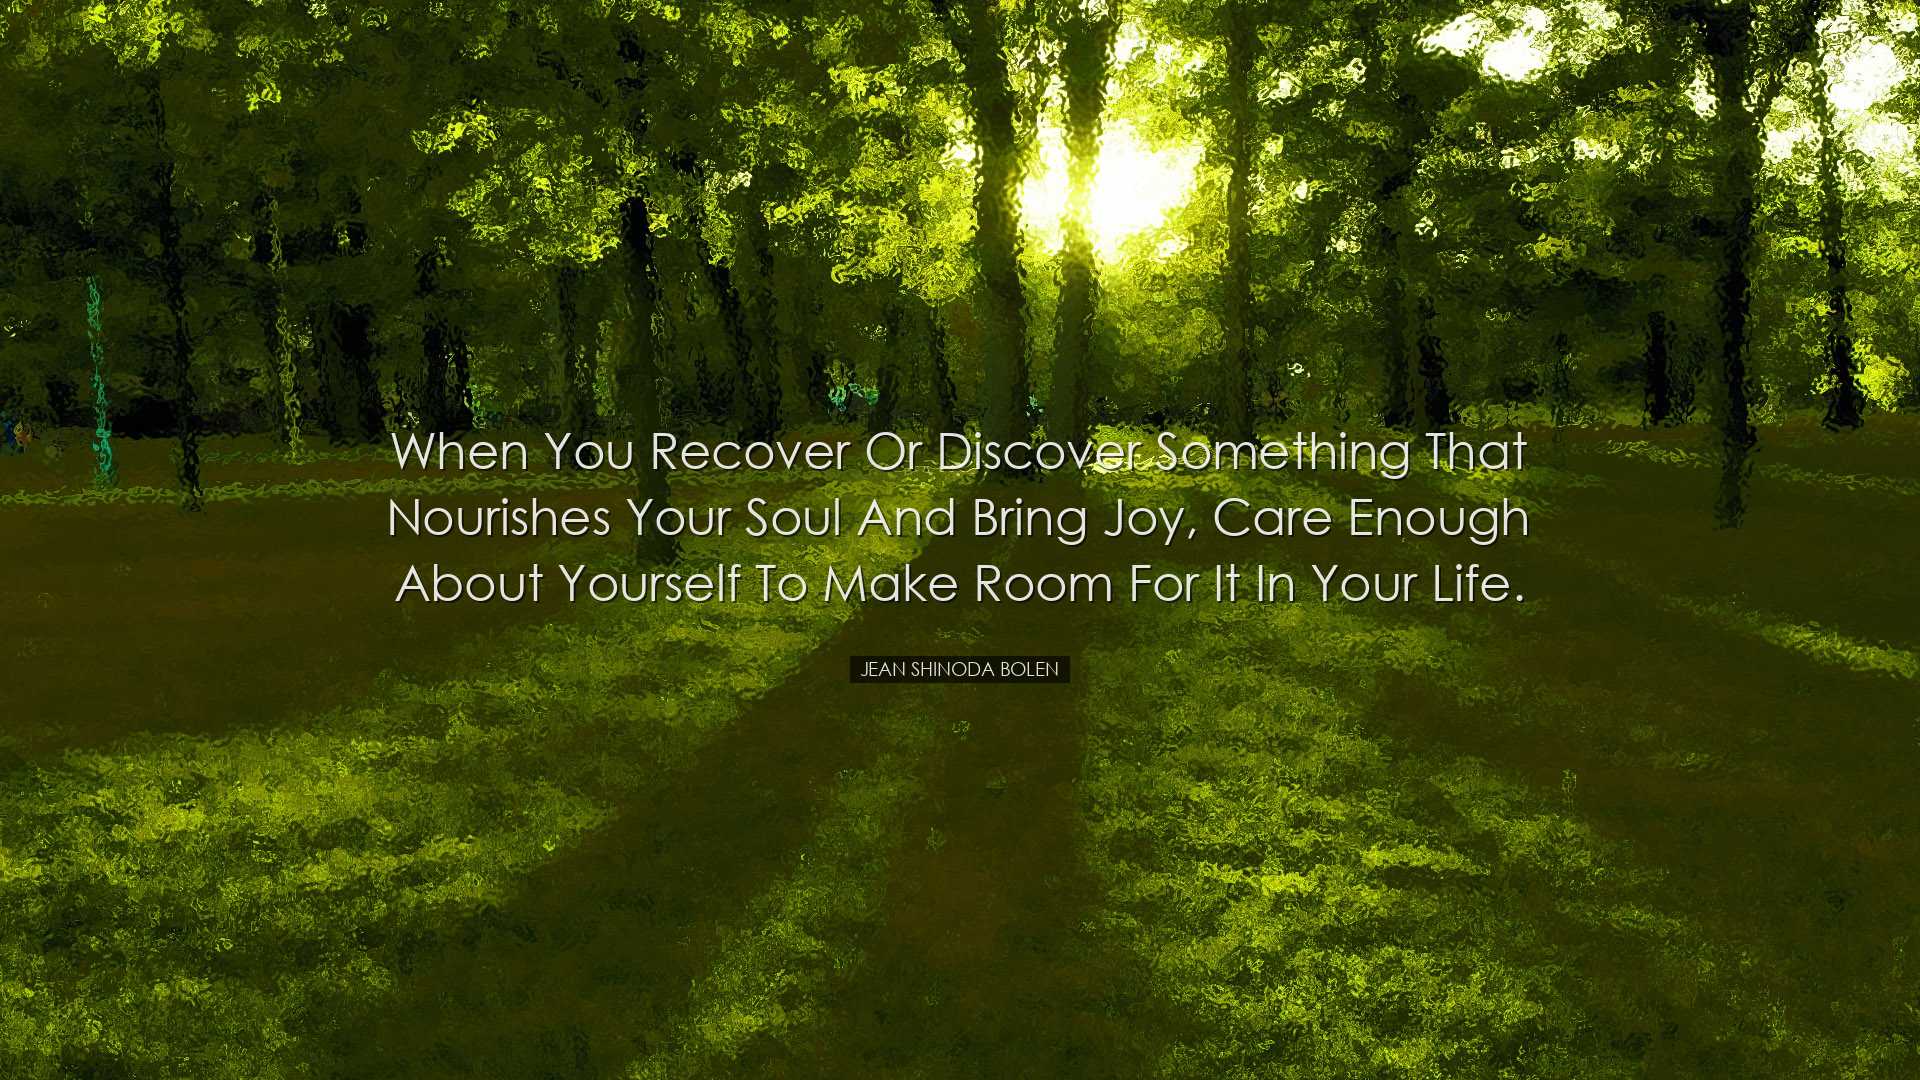 When you recover or discover something that nourishes your soul an